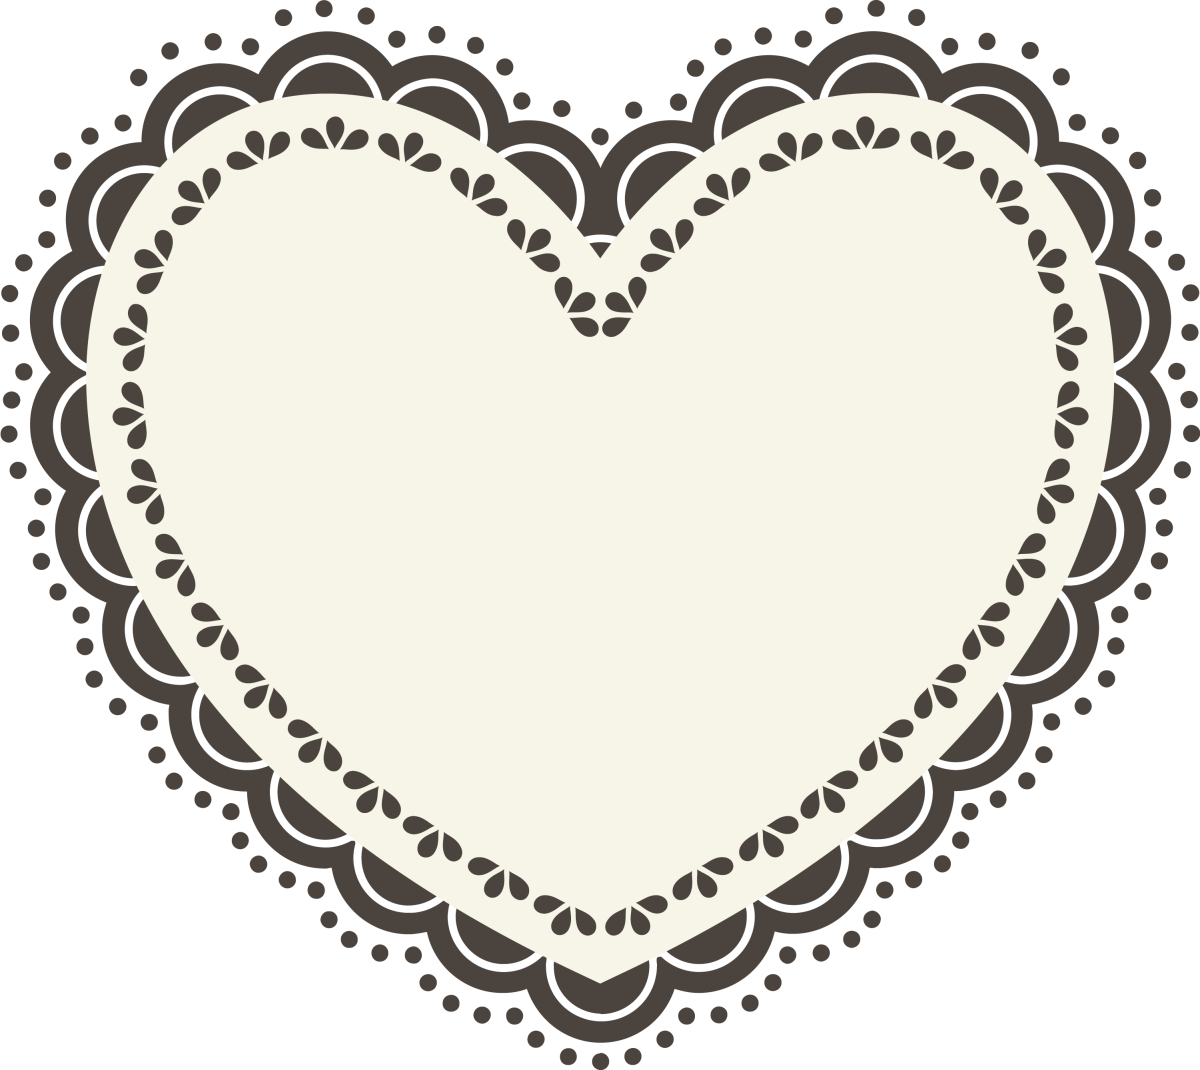 A Heart Shaped Object With A Black Background